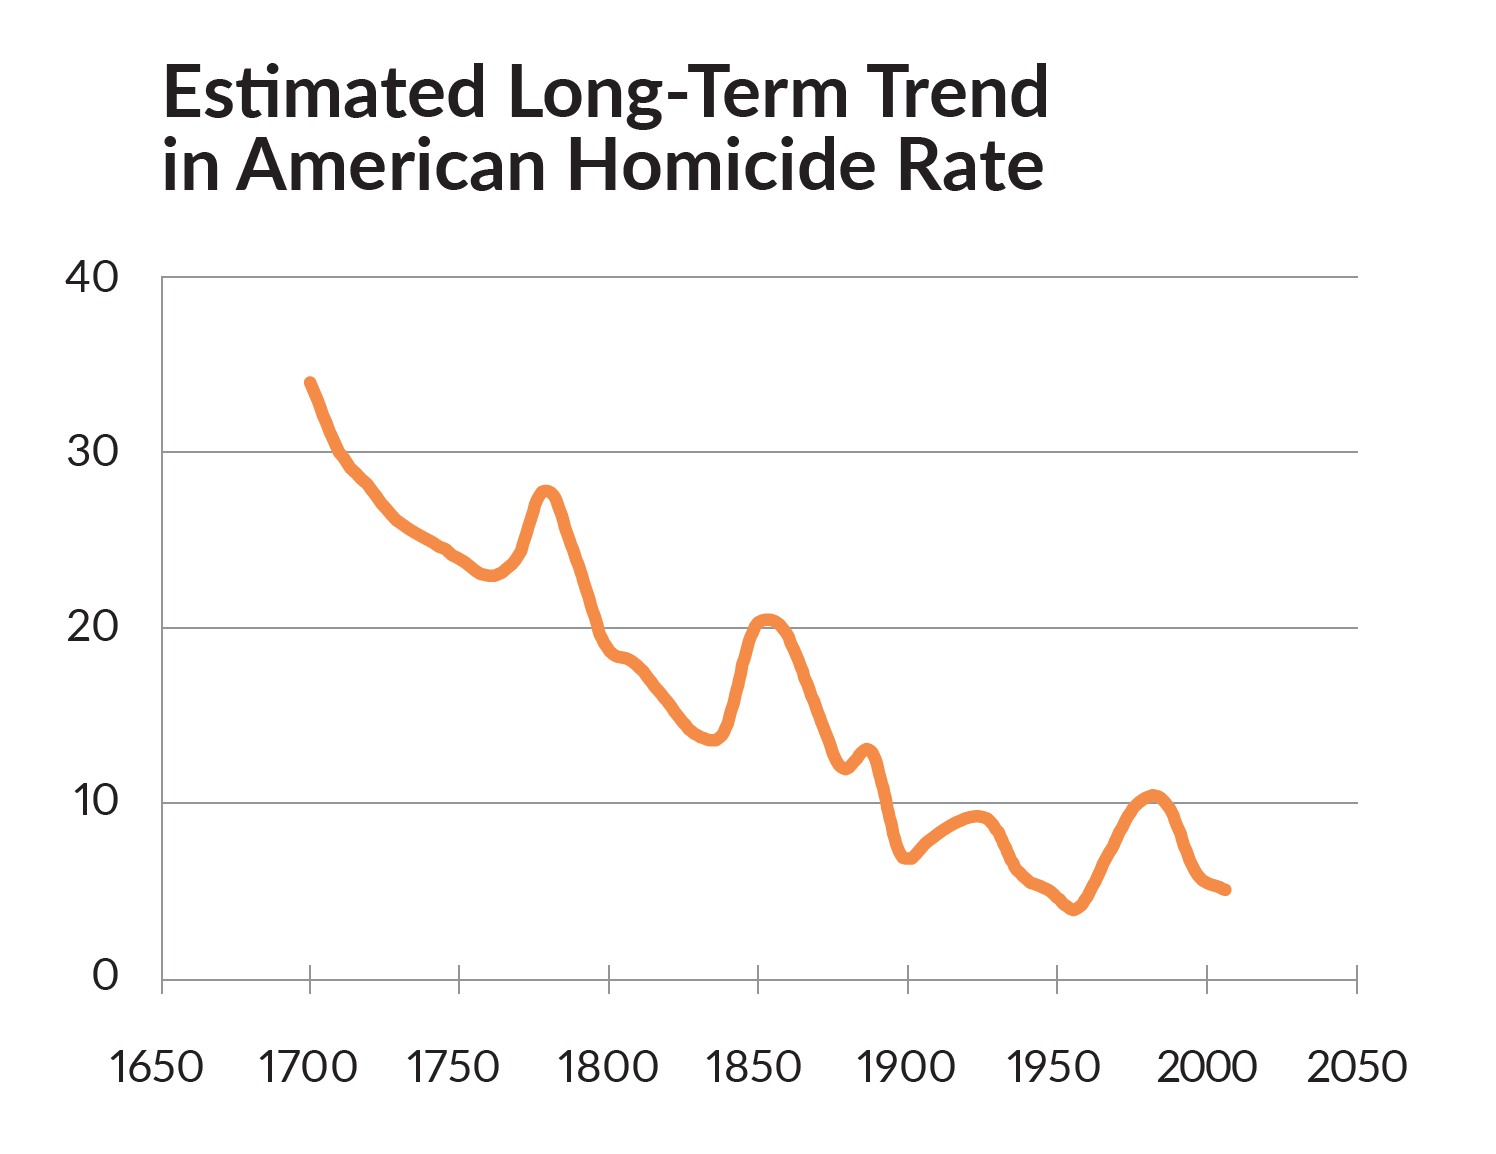 Estimated Long-Term Trend in American Homicide Rate